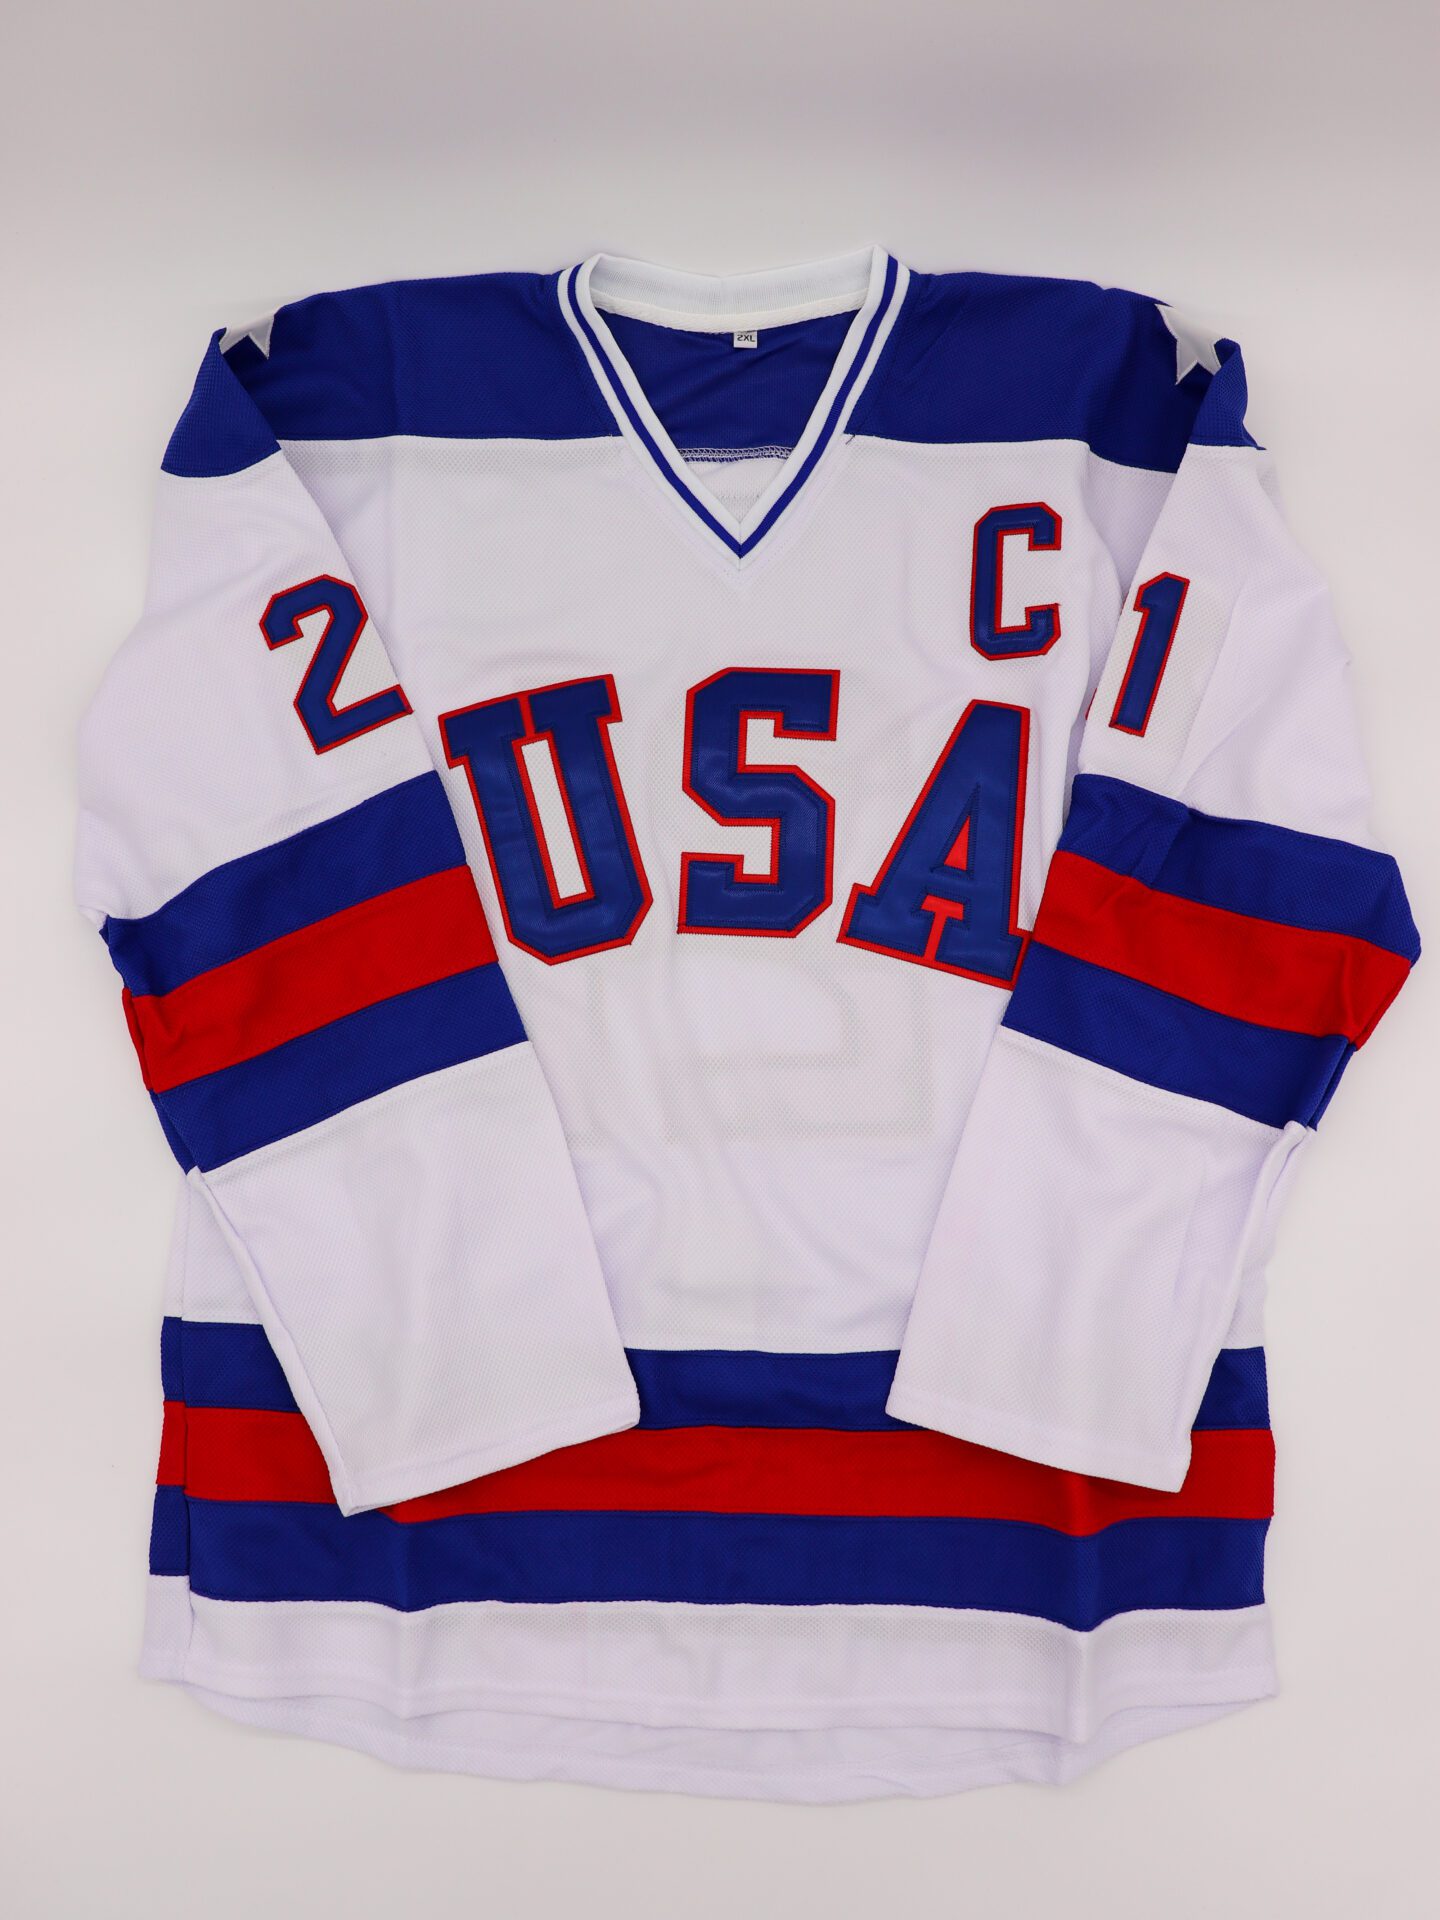 Miracle on Ice reunion to include all but 2 players from 1980